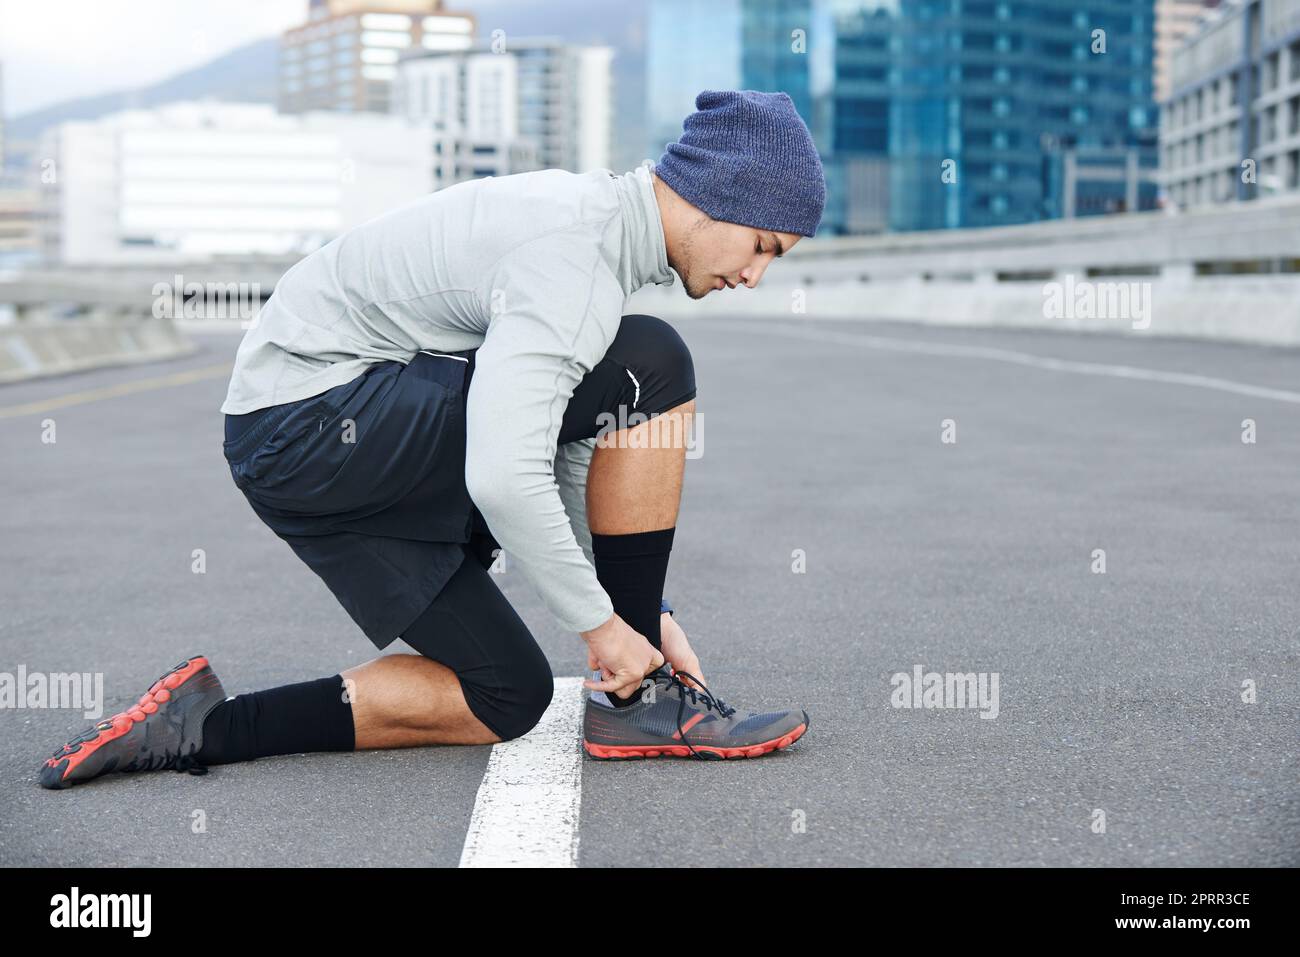 Last minute prep before running. a young man tying up his shoelaces before a run through the city. Stock Photo